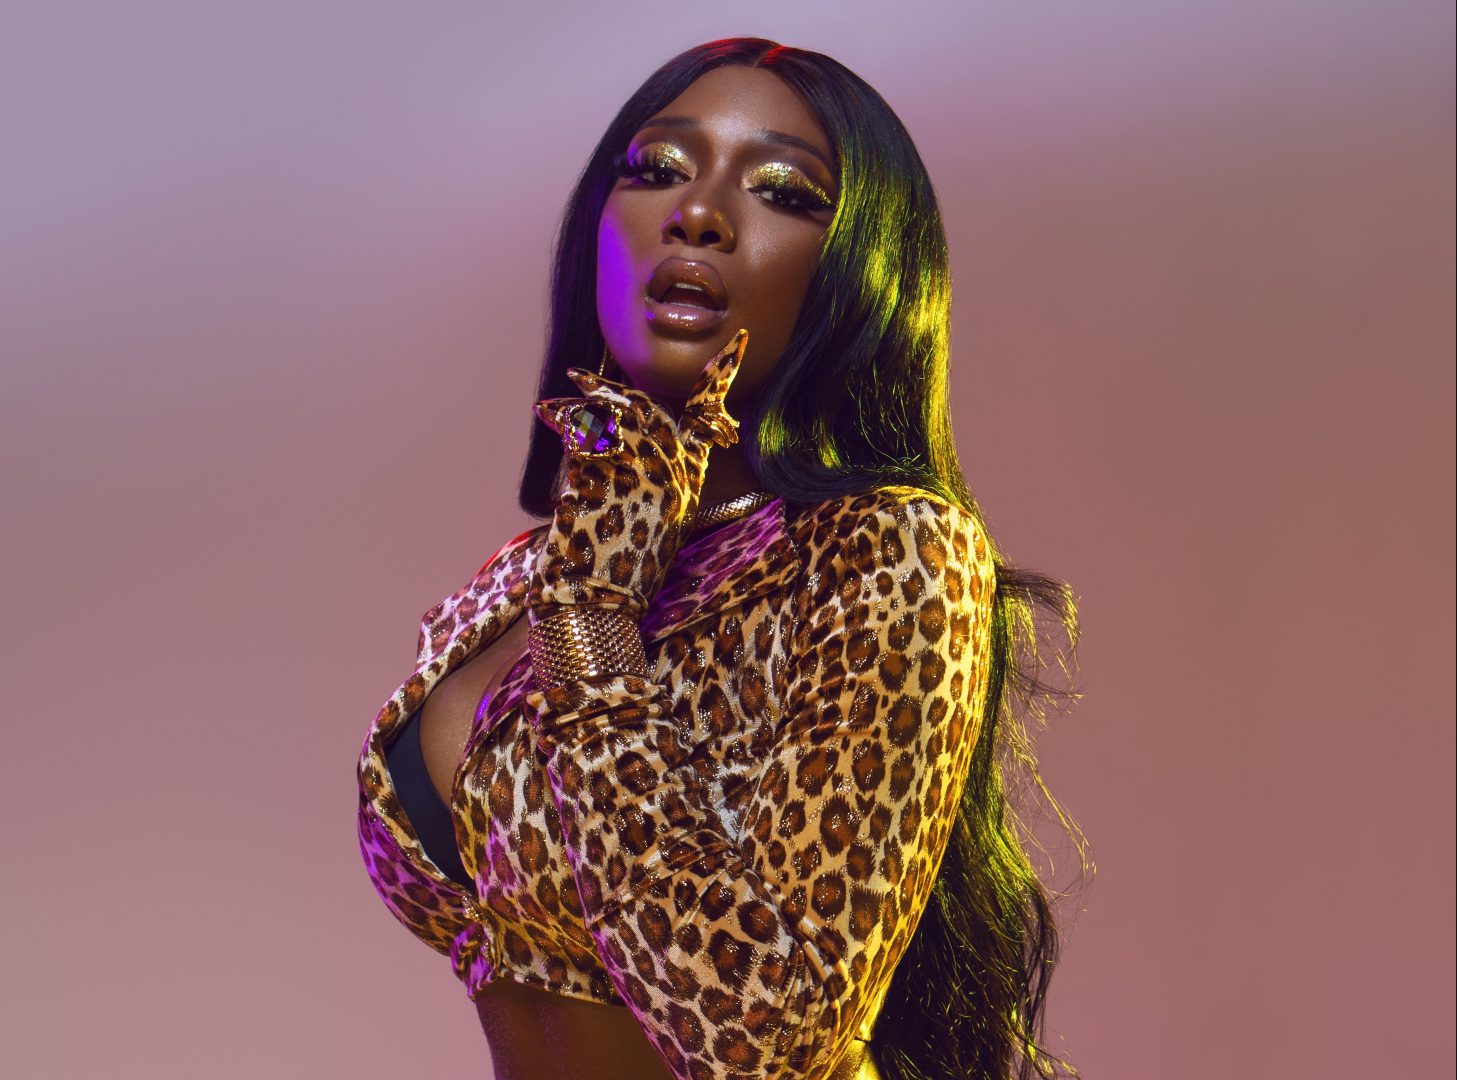 5 things to know when going to see Megan Thee Stallion in concert